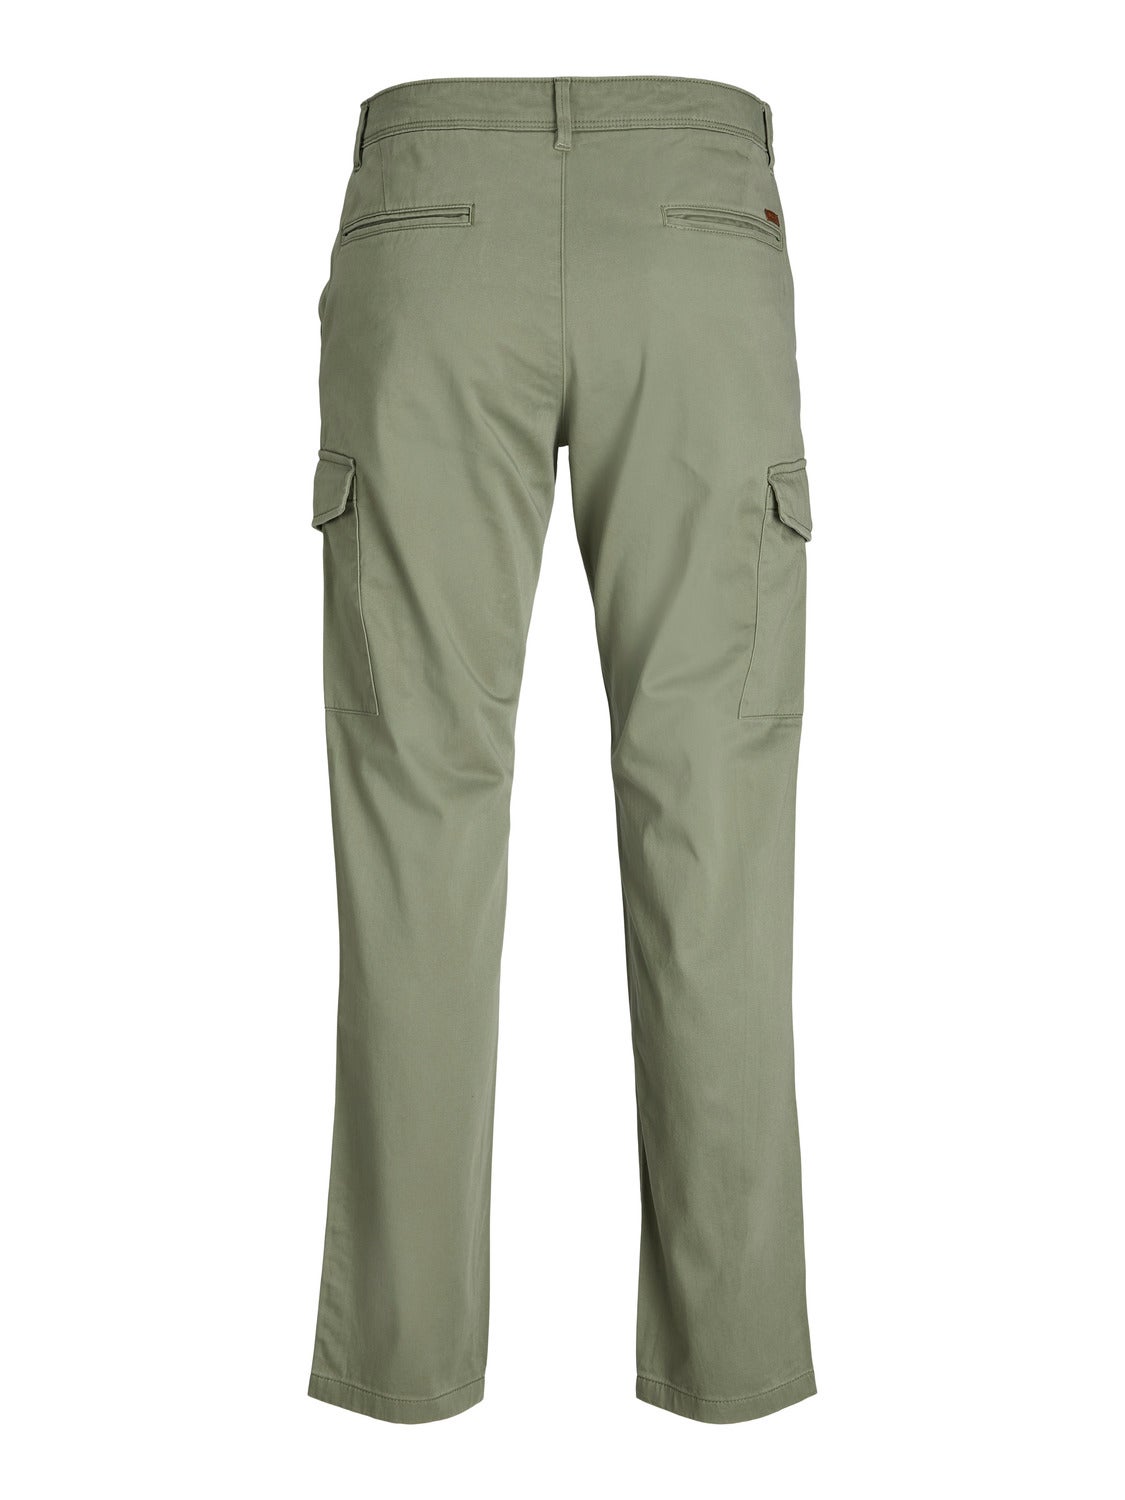 Green Cargo Pants Mid Rise | Ally Fashion